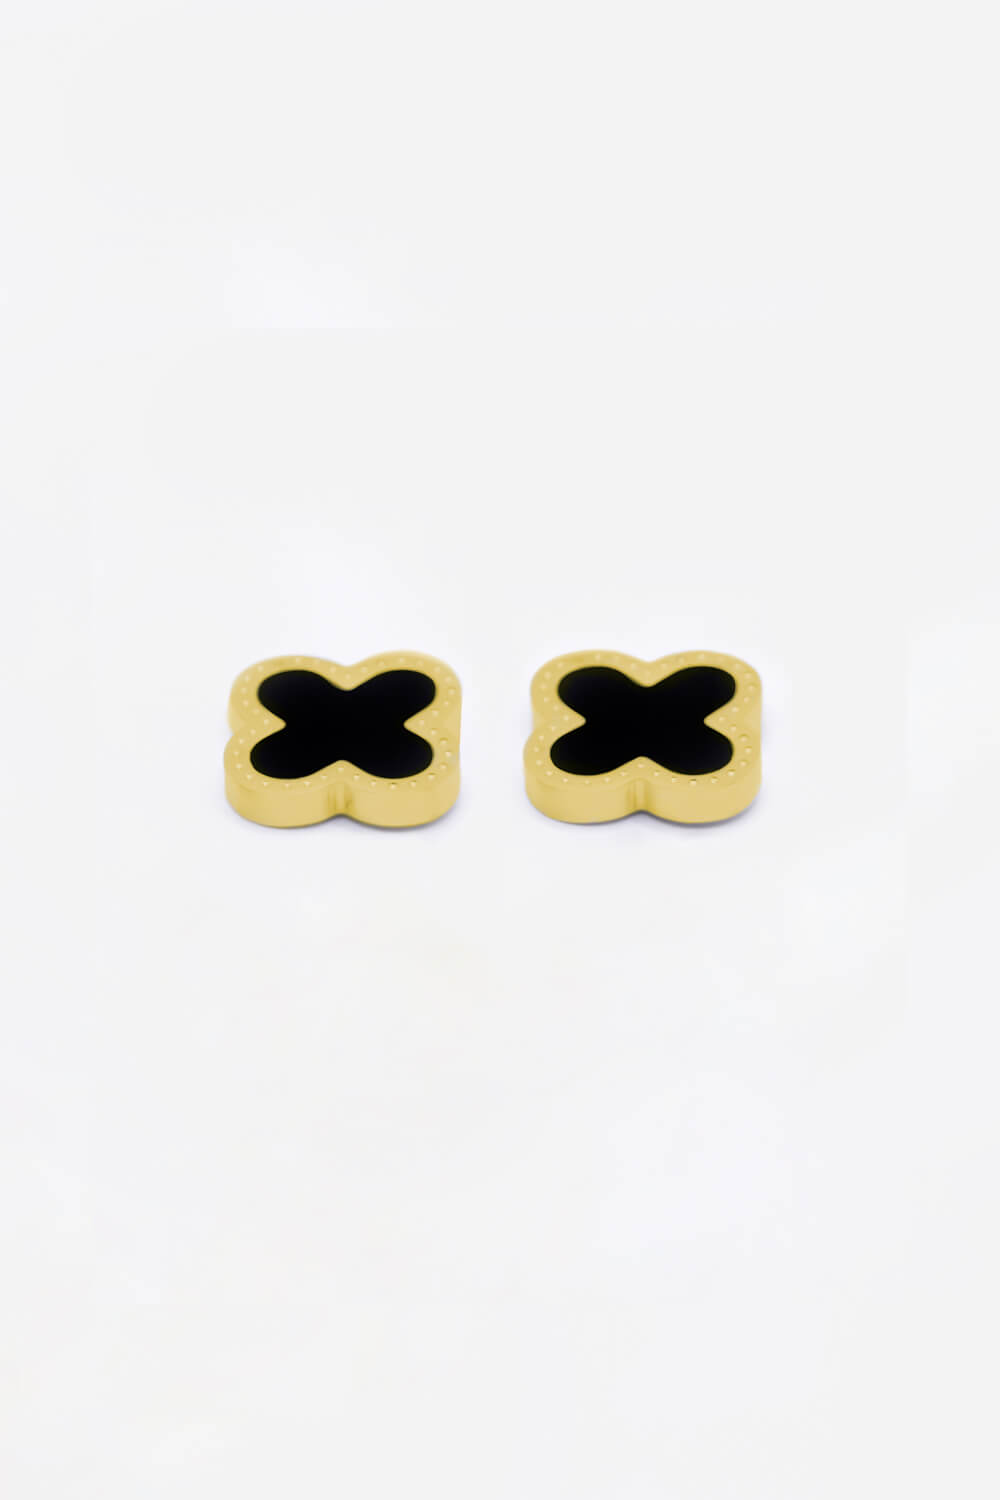 Gold Stainless Steel Clover Earrings, Image 2 of 2